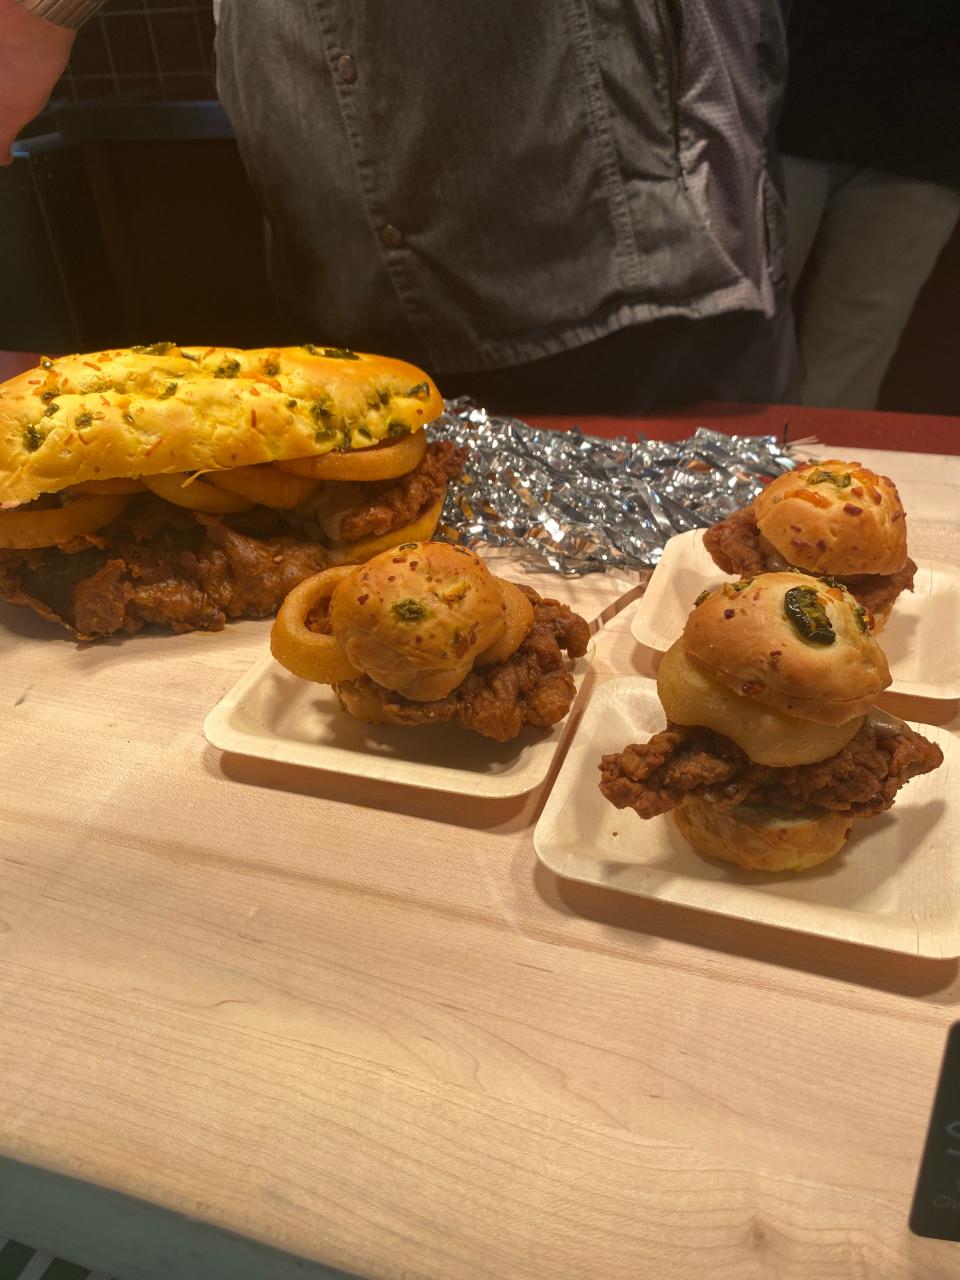 The fried ribeye sandwich is a new signature offering from Levy Restaurants that will be available at all OU home football games this season.